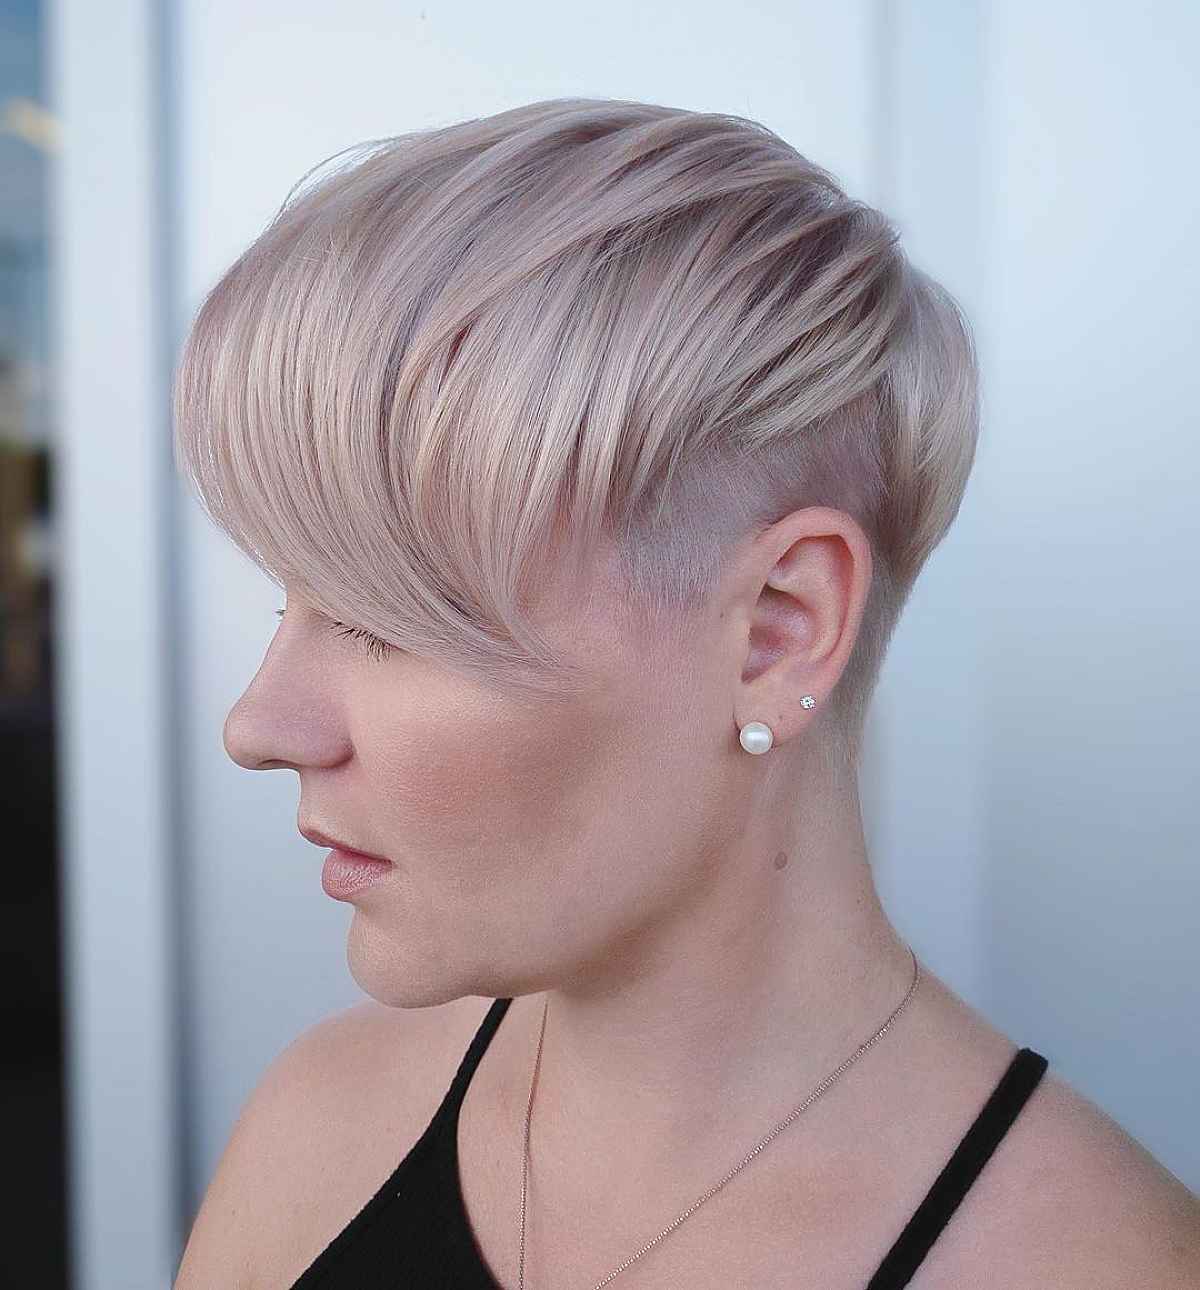 Short Hair with an Undercut and Swooping Bangs